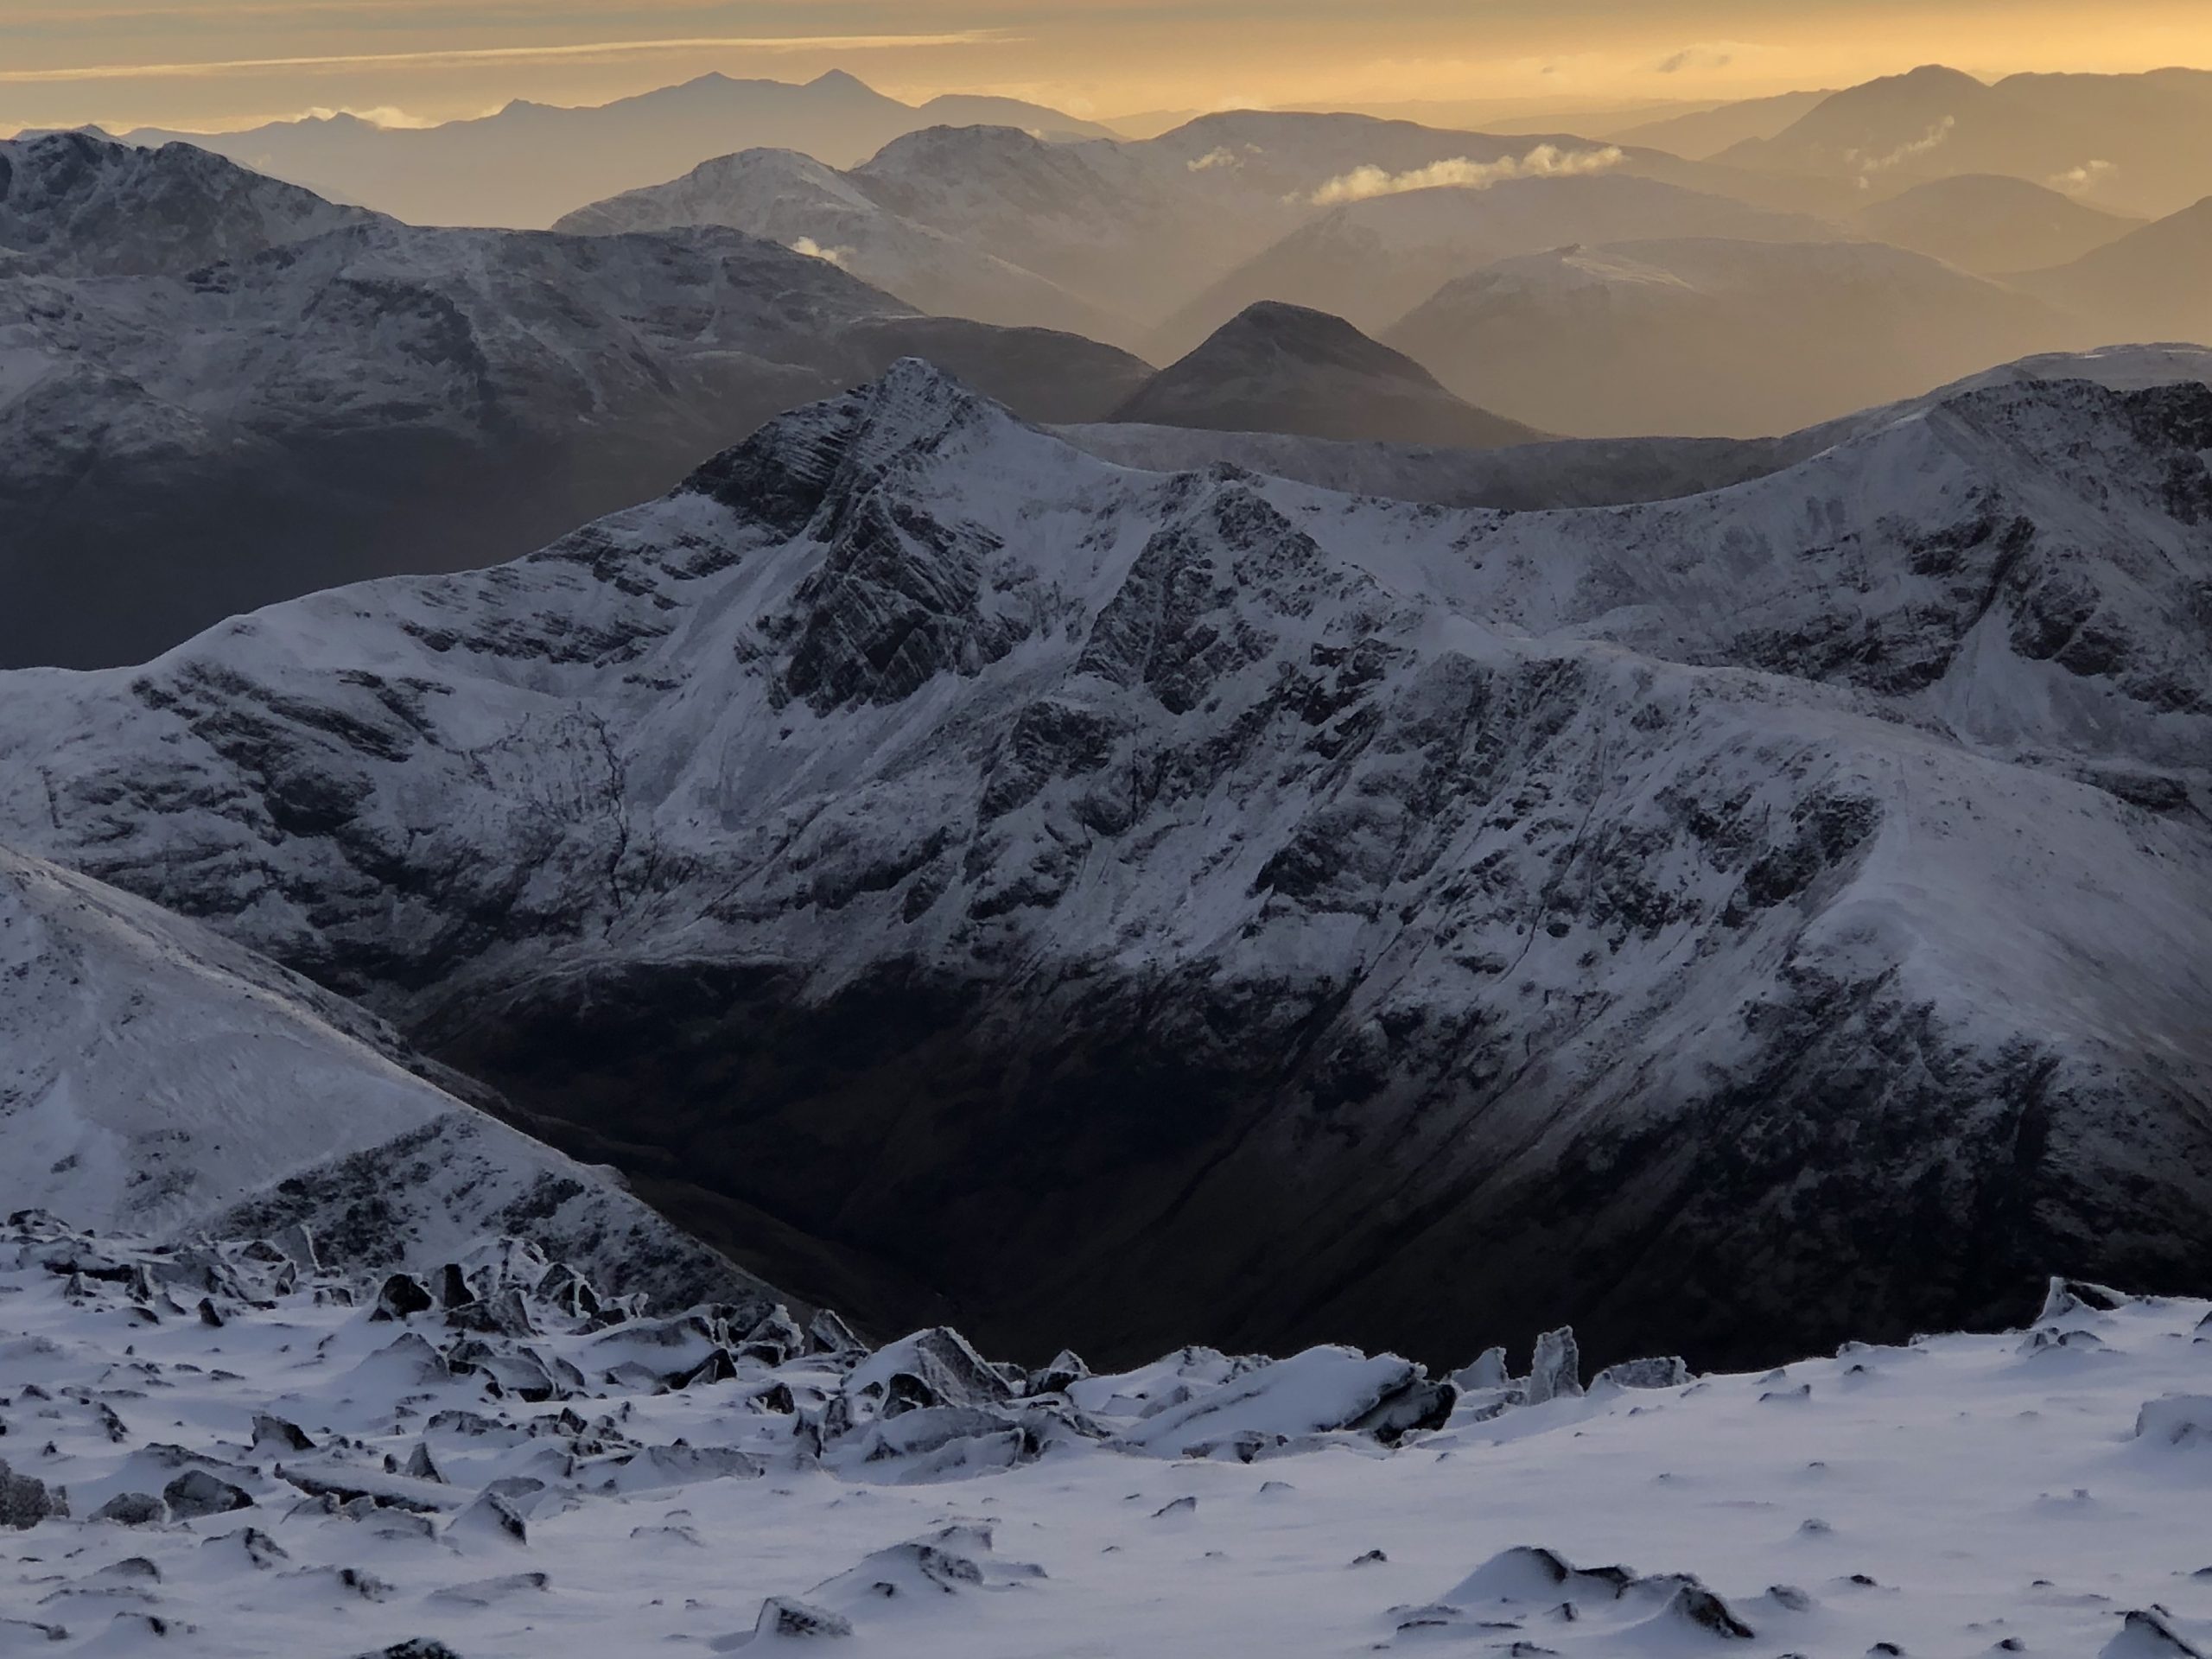 Looking south from Ben Nevis in winter as the sun sets - a view of the Mamores and beyond